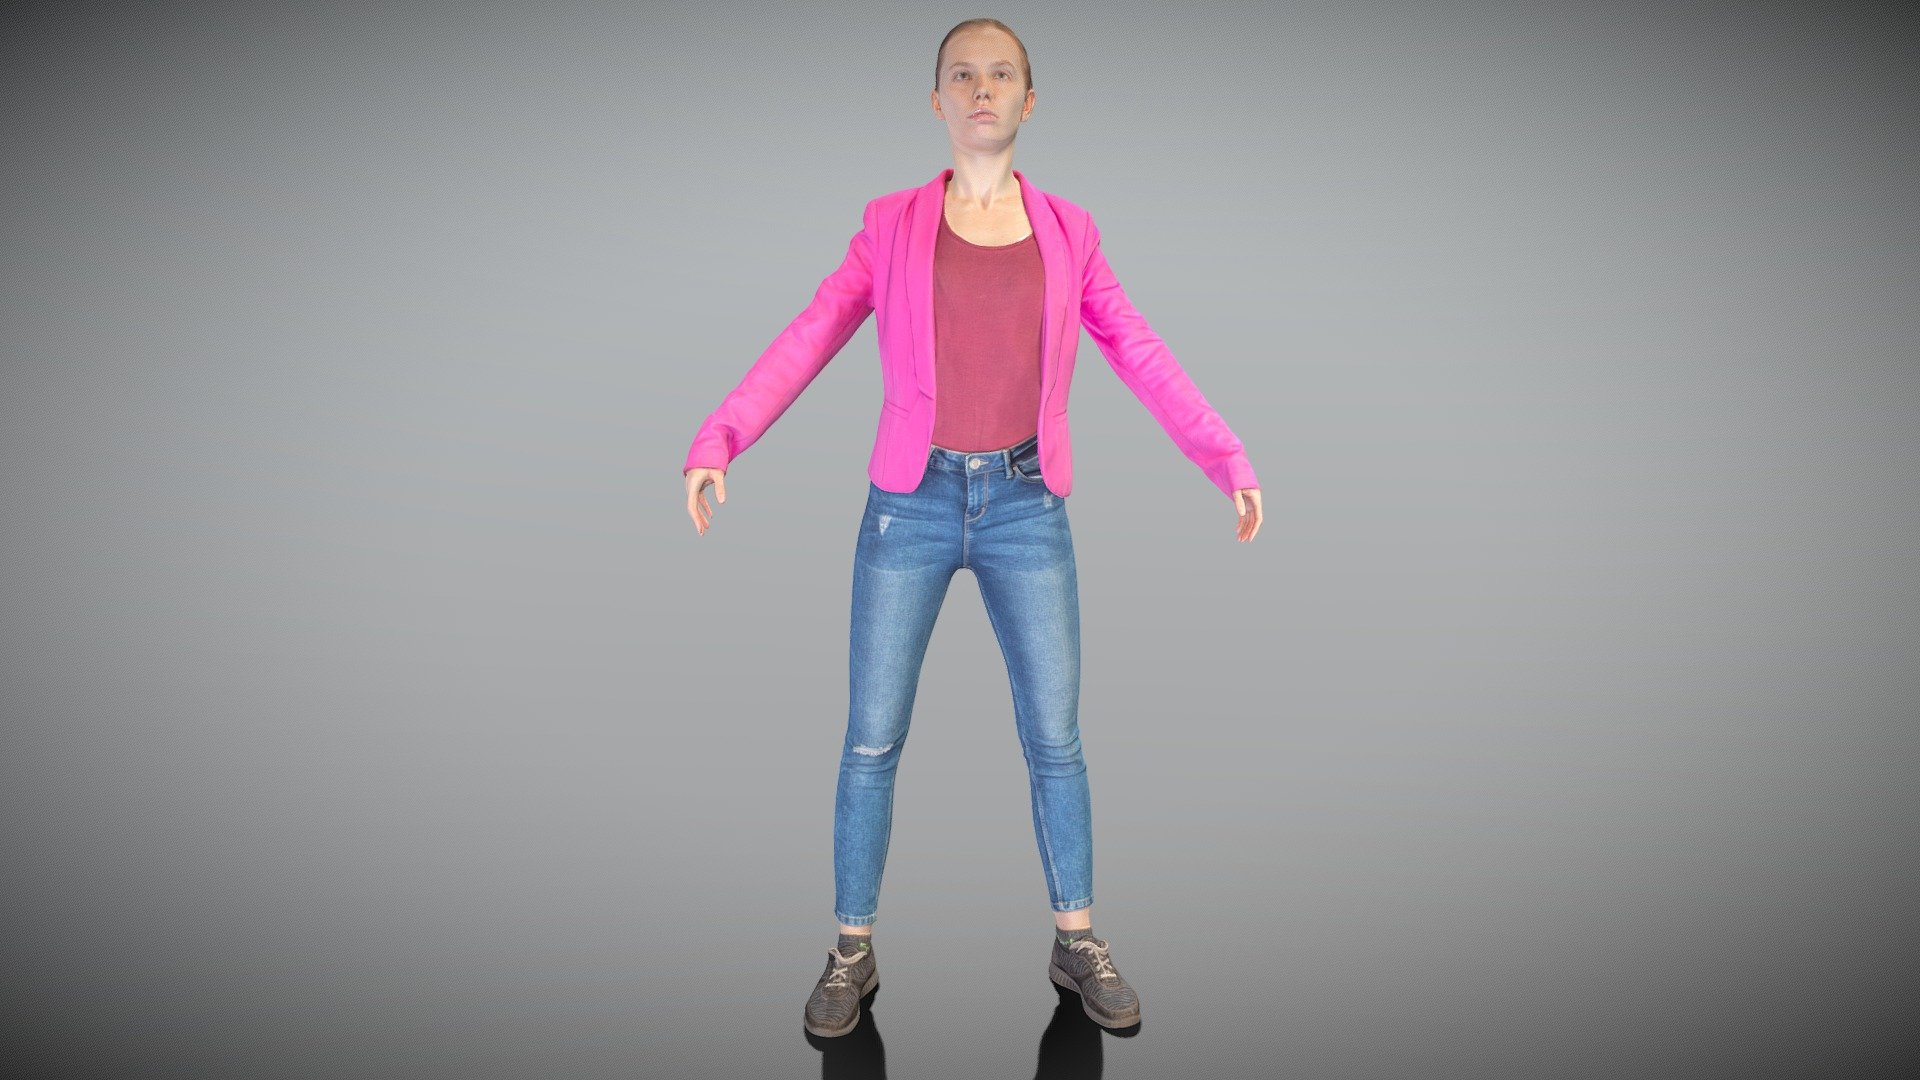 Female in purple jacket ready for animation 200